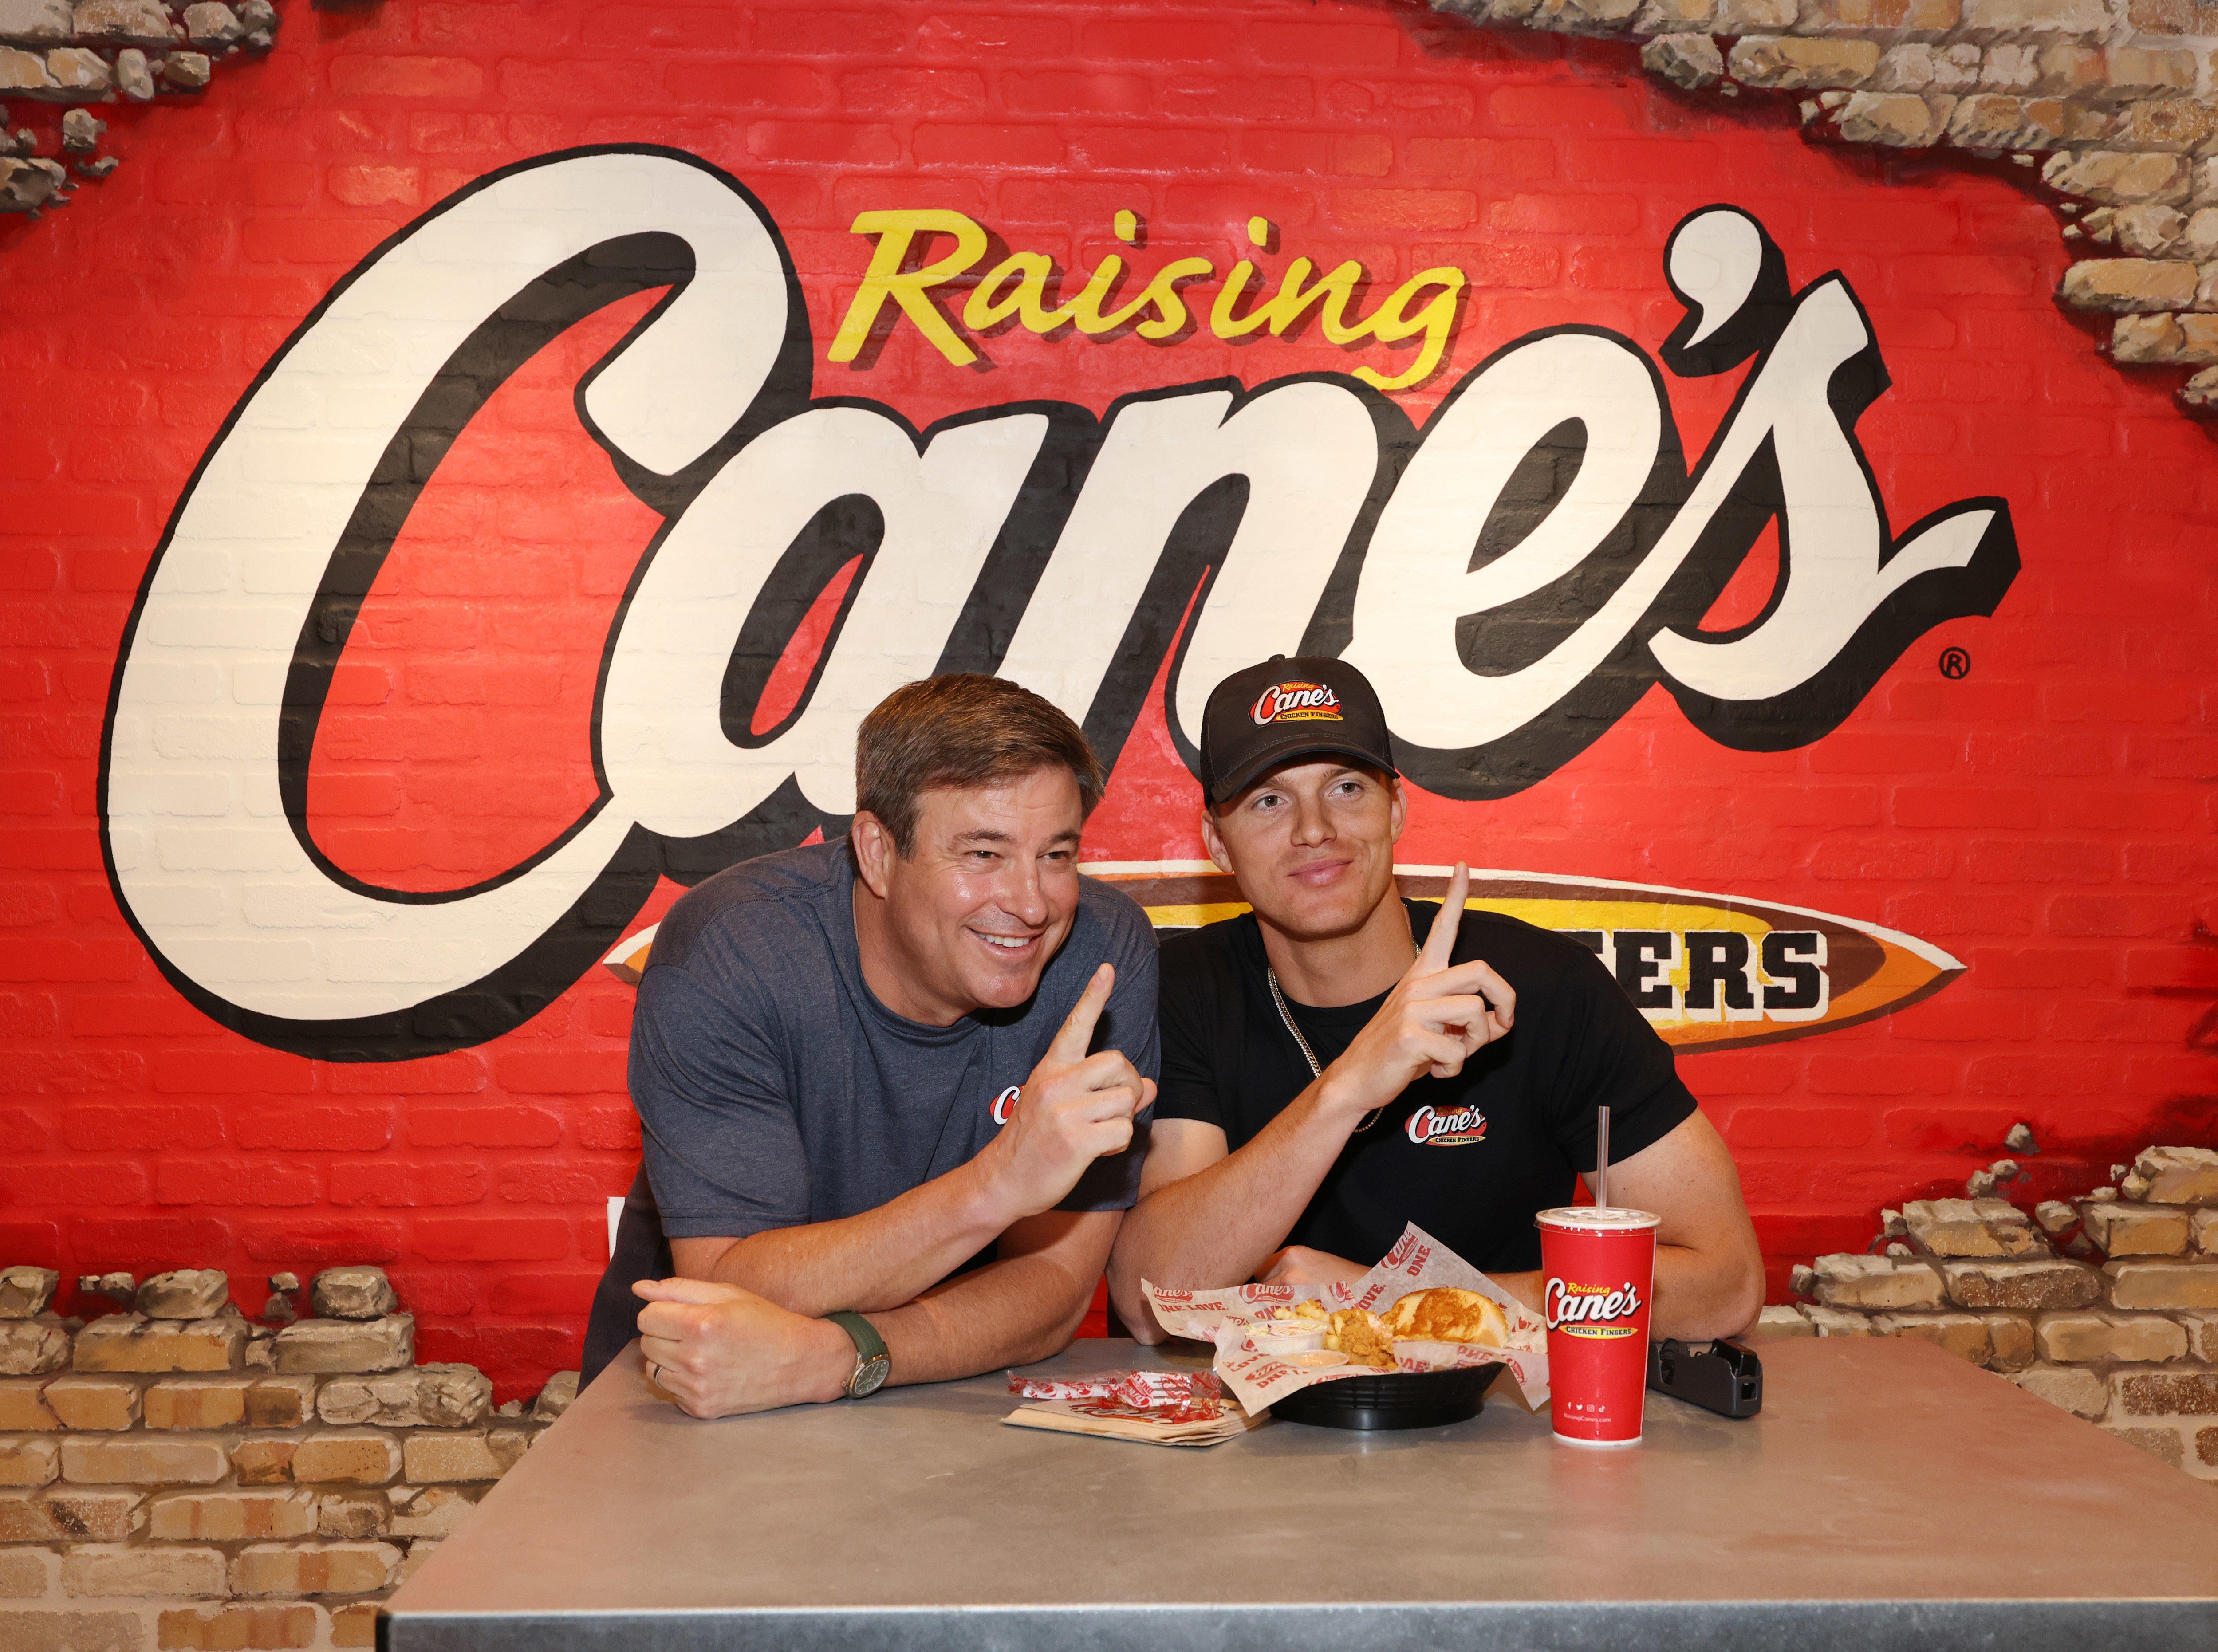 Country Music Artist And 59th ACM Awards Nominee Parker McCollum Visits Raising Cane's Dallas-Area Support Center With Owner Todd Graves